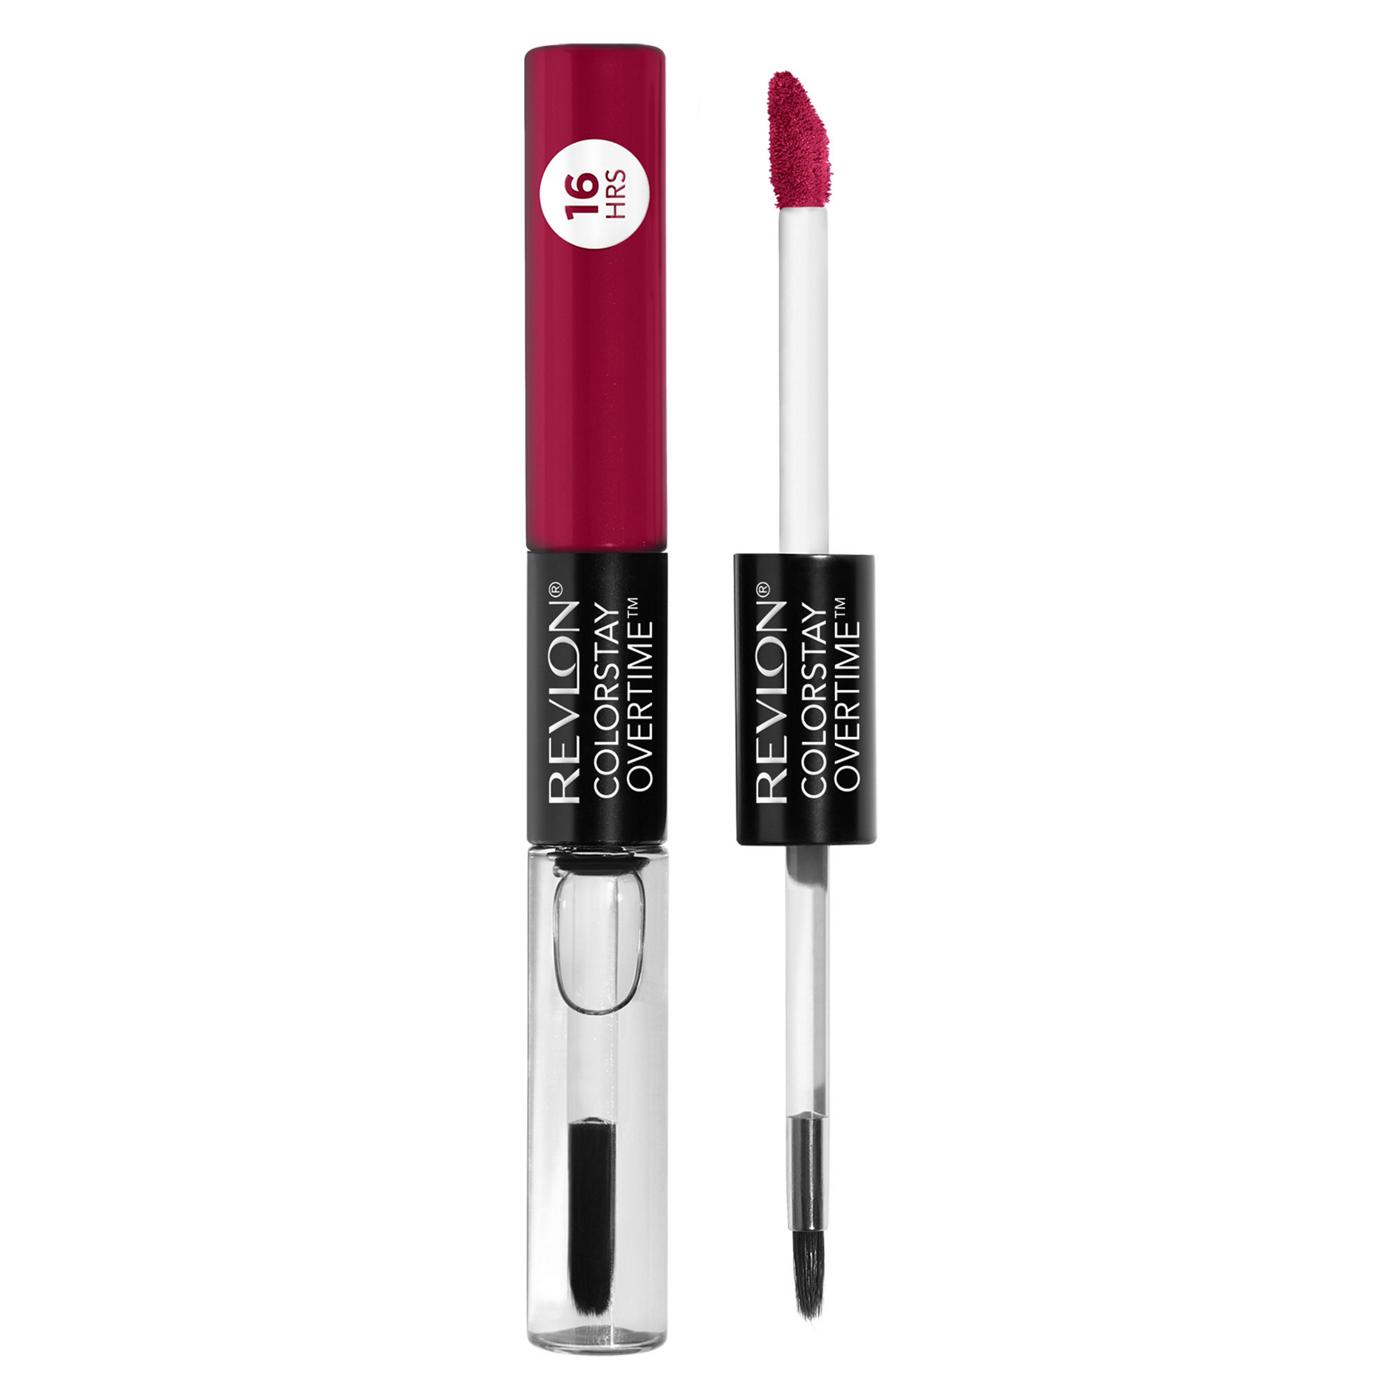 Revlon ColorStay Overtime Lipcolor - 010 Non-Stop Cherry; image 2 of 8